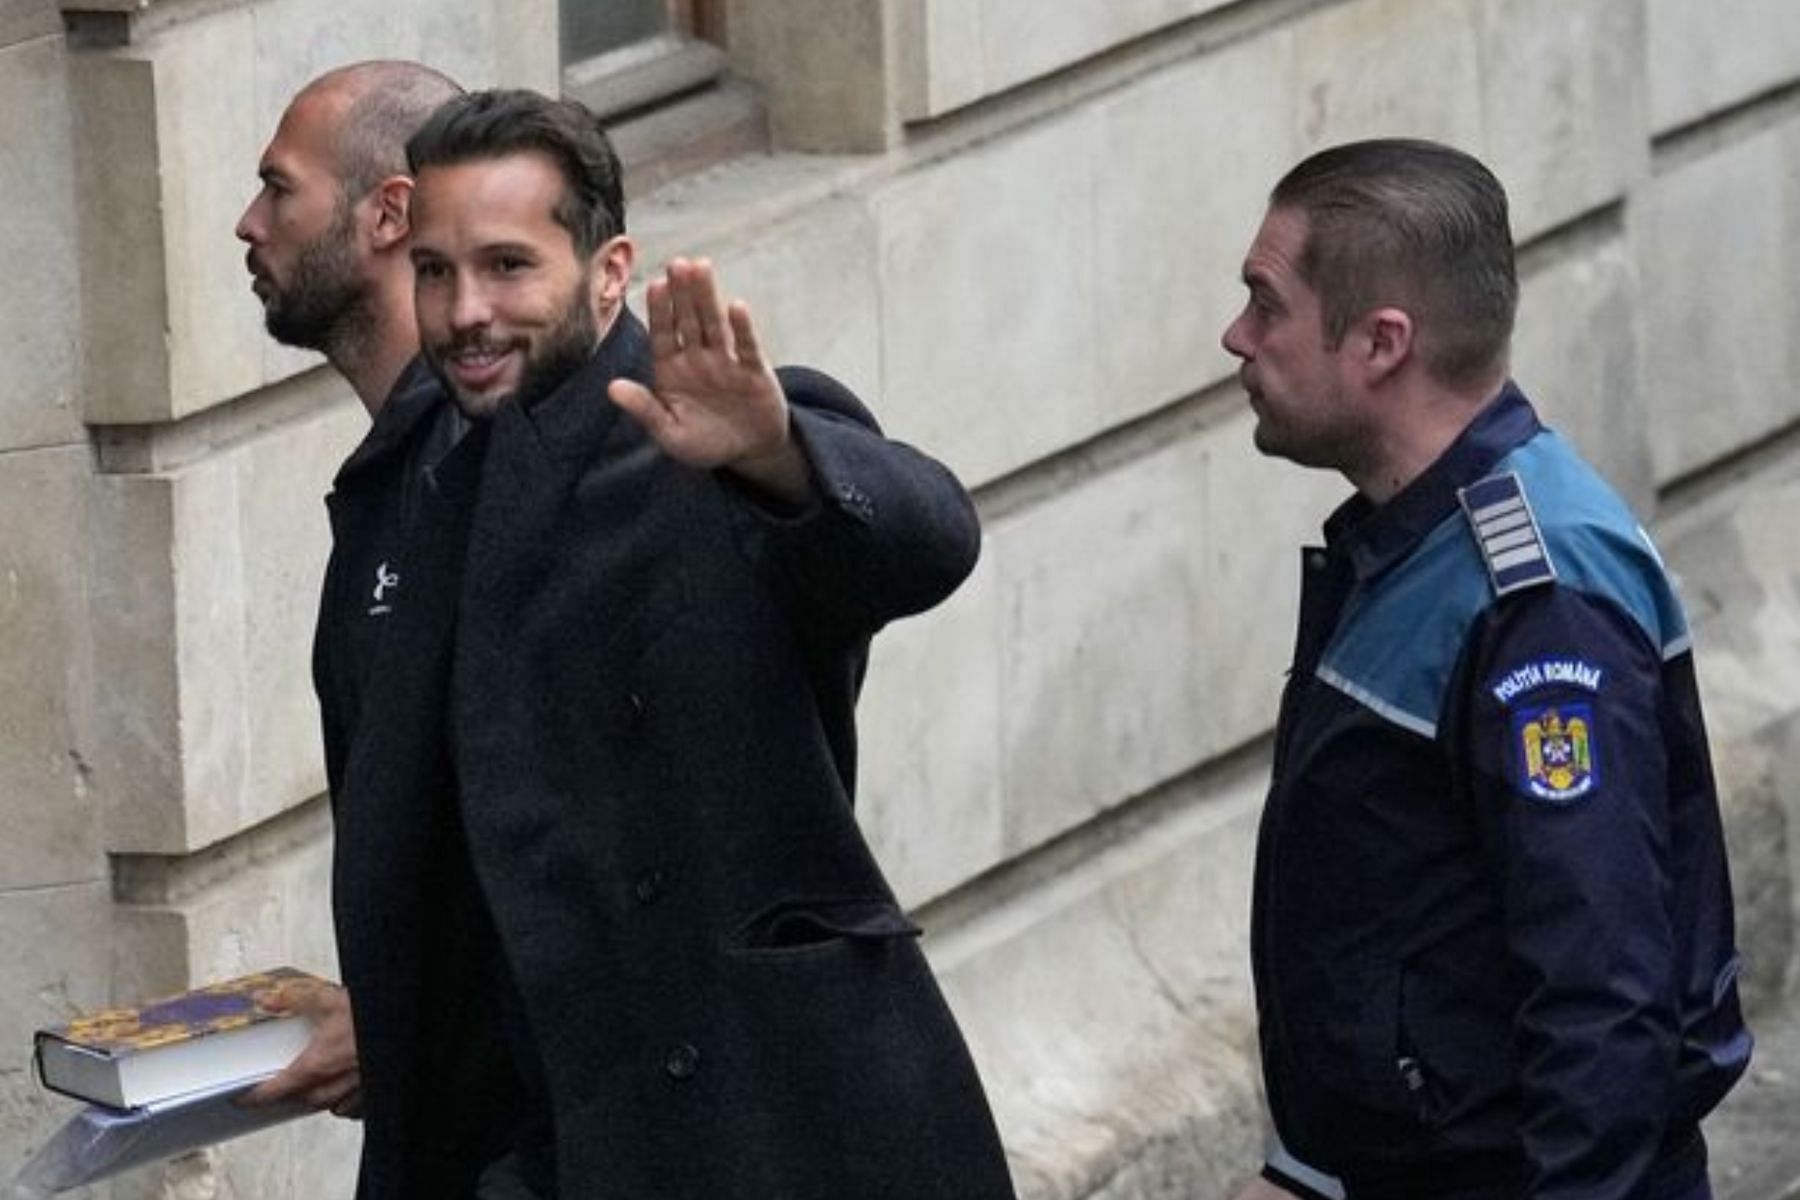 Tristan Tate waved to the group of supportes who assembled outside the appeals court on Tuesday. (Image via Vadim Ghirda/AP)